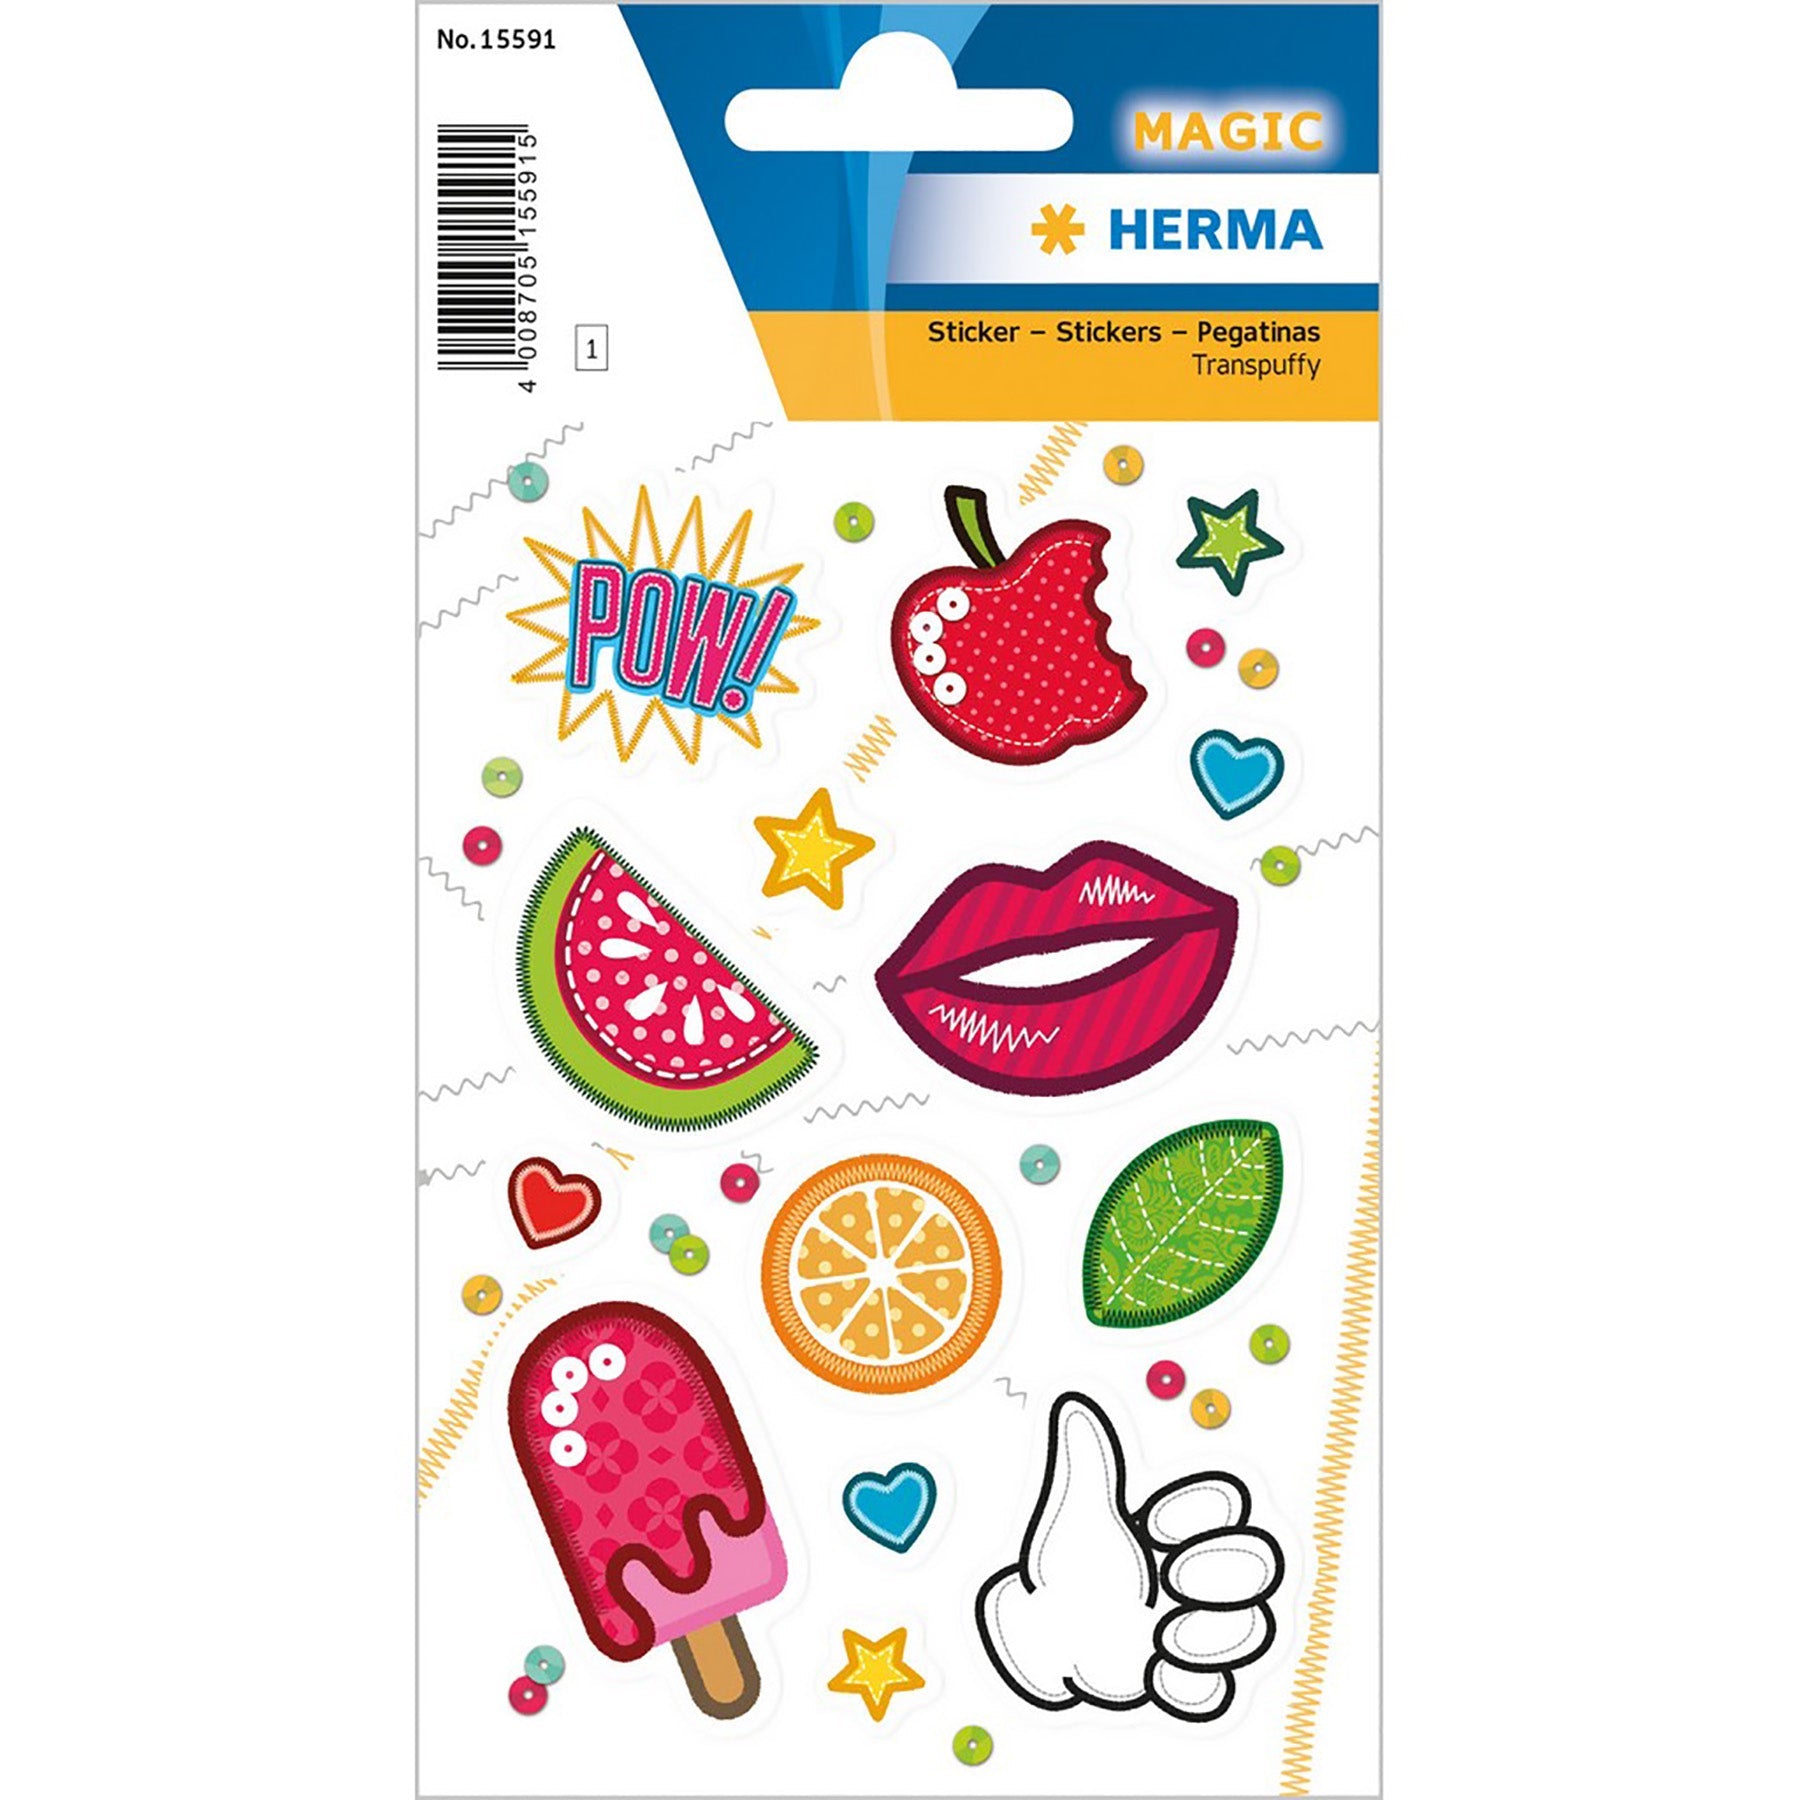 Herma Magic Stickers Good Vibes Transpuffy 4.75x3.1in Sheet